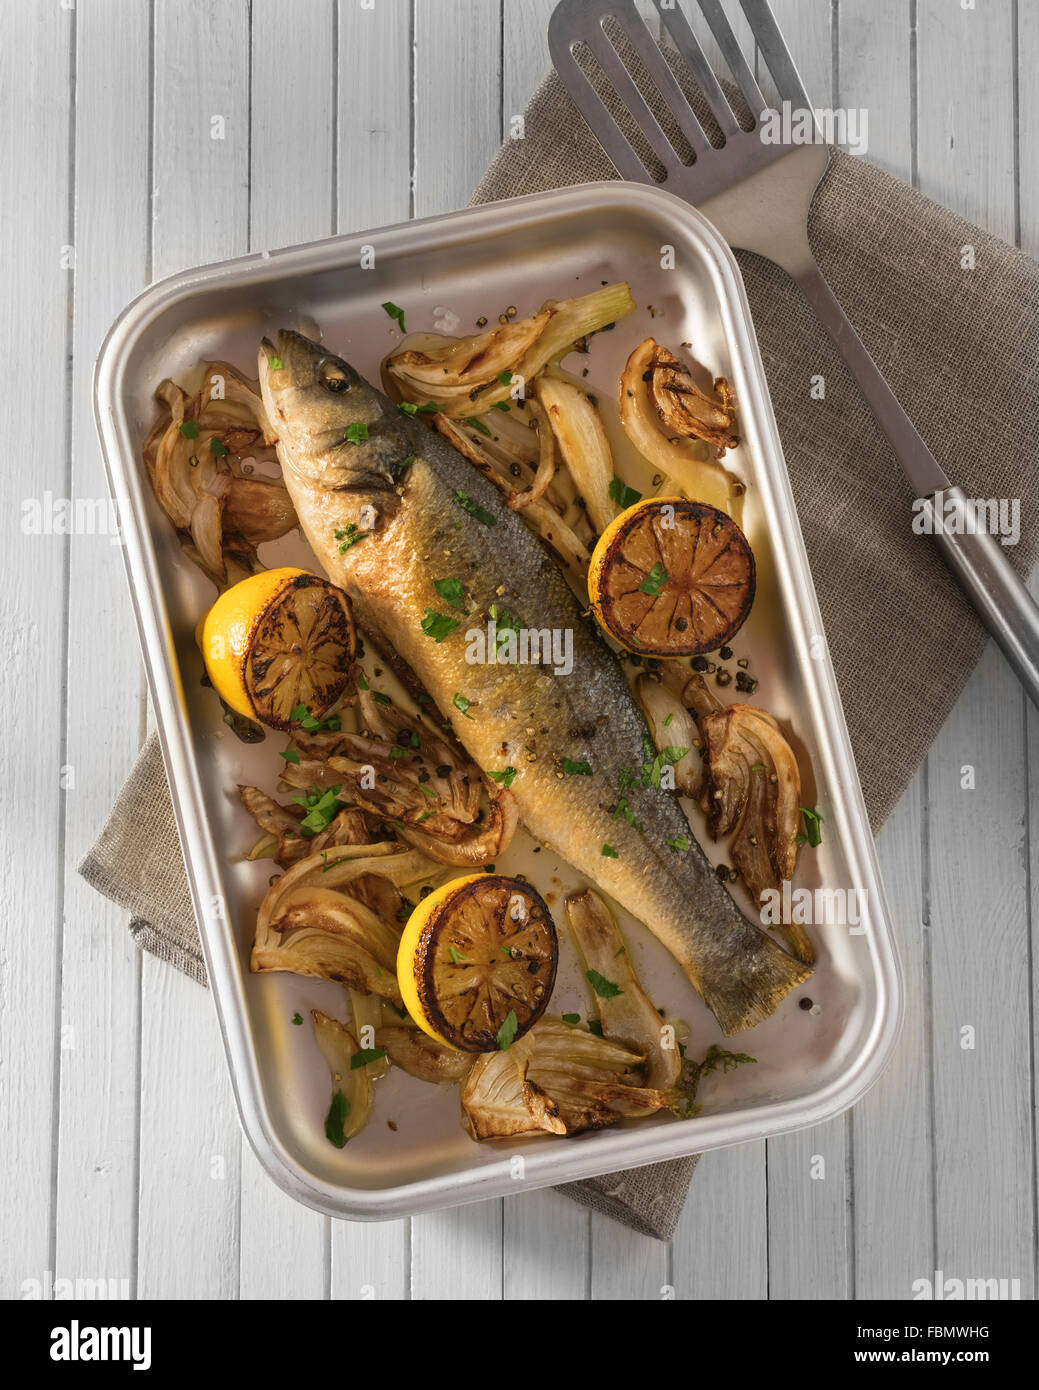 Baked sea bass with fennel and lemon Stock Photo